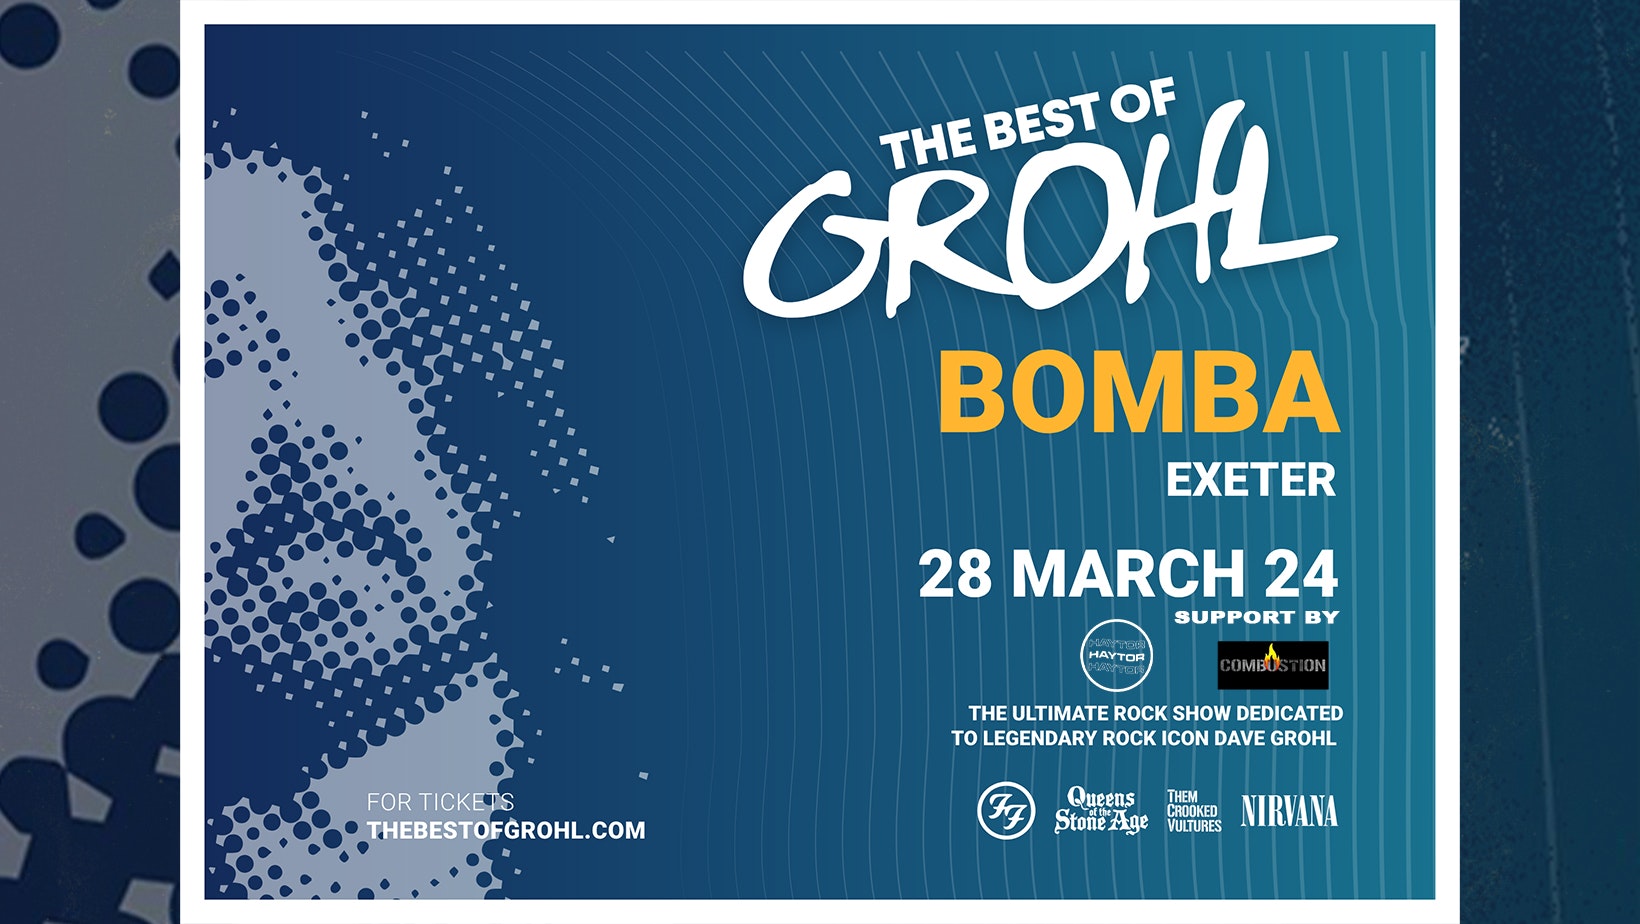 The Best Of Grohl (Dave Grohl Tribute) live at Bomba, Exeter (FOO FIGHTERS, NIRVANA, QOTSA, THEM CROOKED VULTURES), support – HAYTOR,  3 DAYS OF WONDER + COMBUSTION